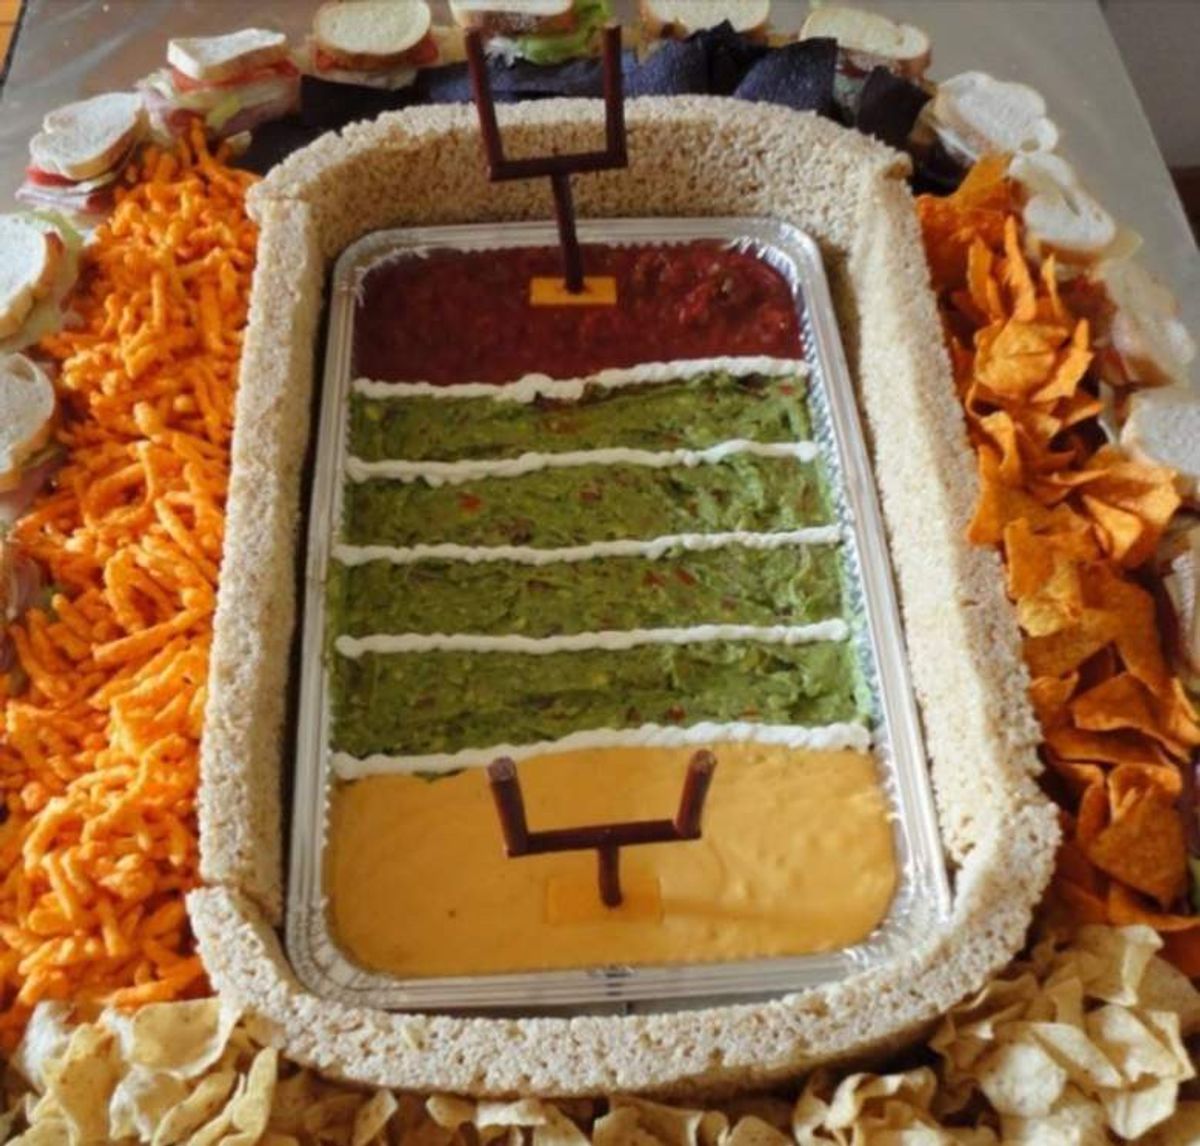 The Best Food To Have At A Superbowl Party